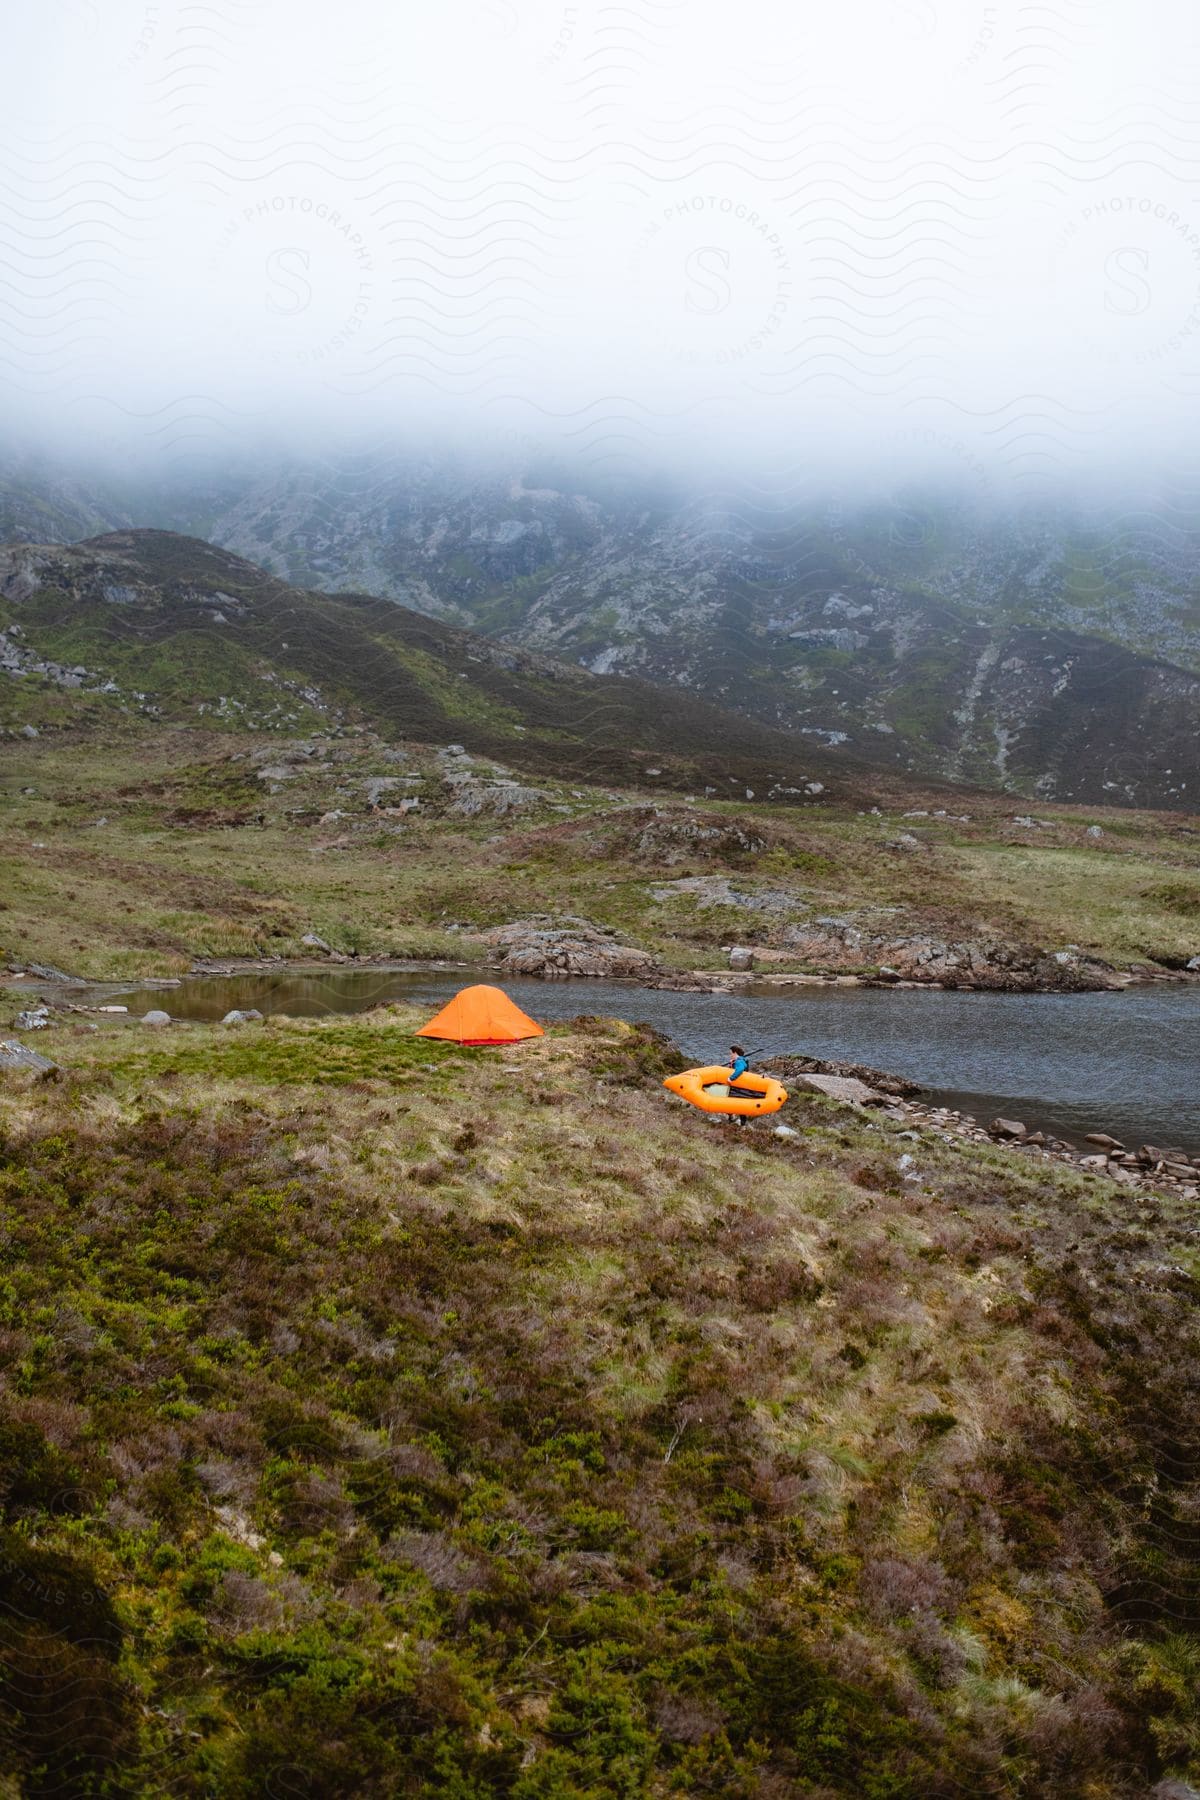 A man camping in the hills near a lake carrying an inflatable boat to his tent